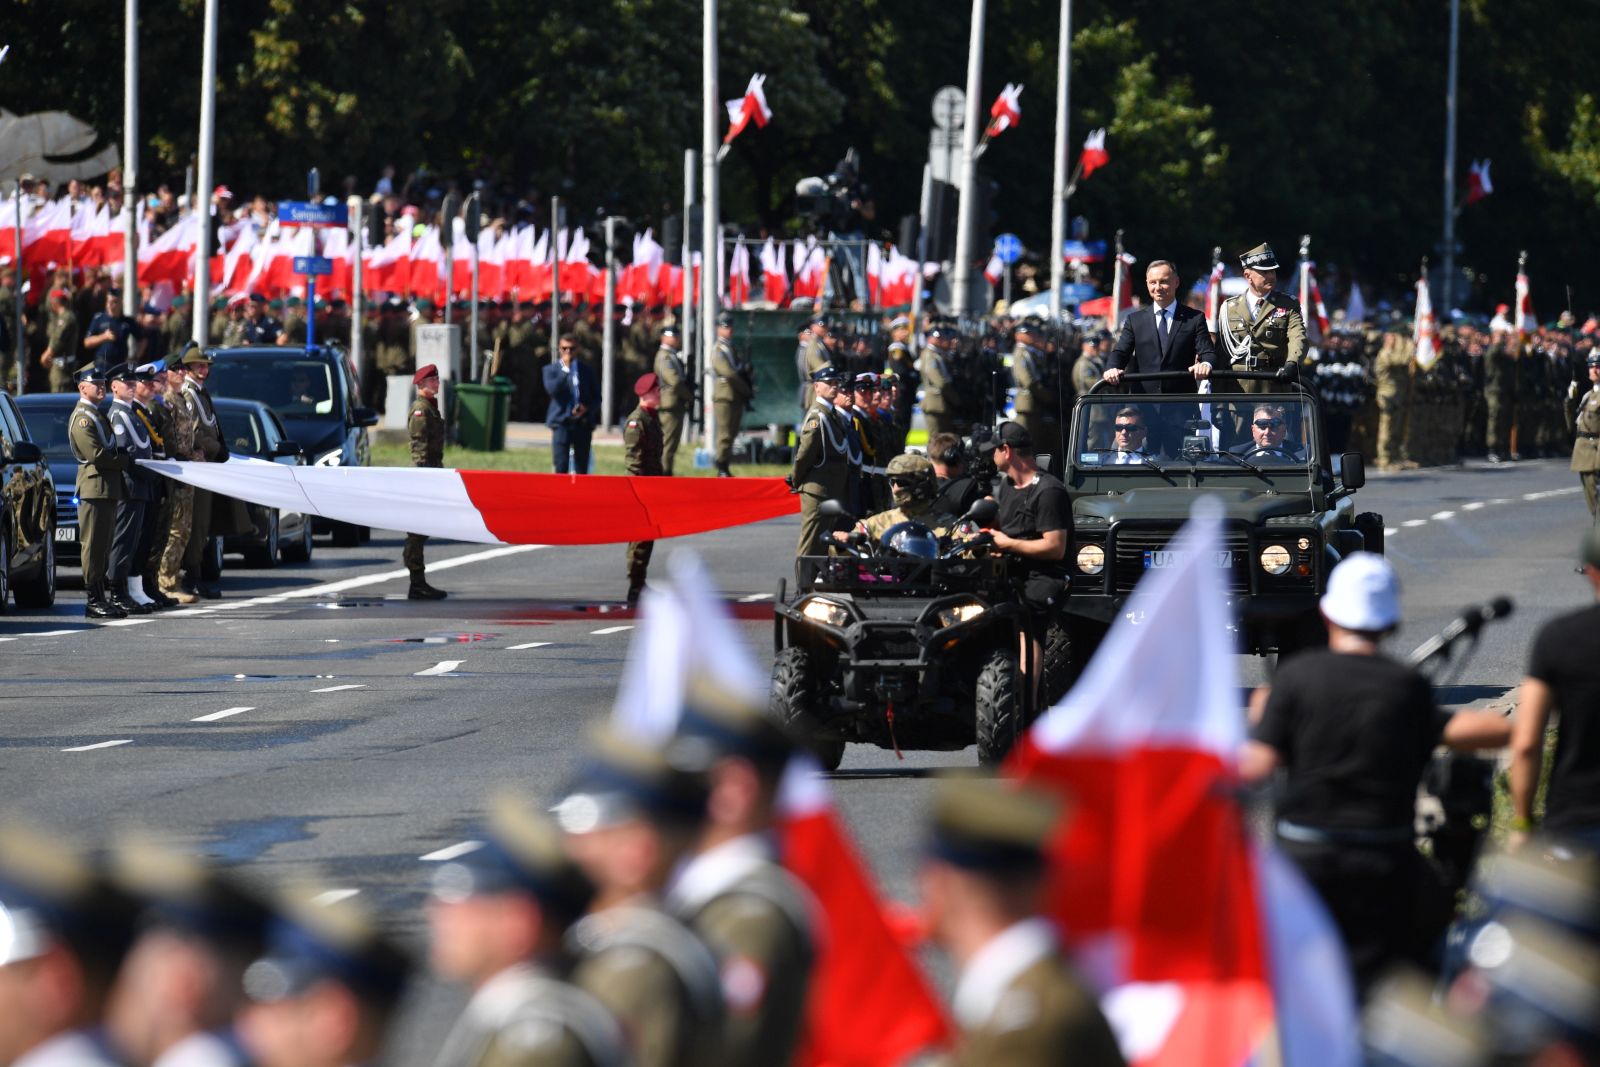 epa10801372 Polish President Andrzej Duda (2R) and Polish Chief of General Staff Gen. Rajmund Andrzejczak (R) take part in the military parade during the Polish Armed Forces Day in Warsaw, Poland, 15 August 2023.  Polish Armed Forces Day is a national holiday celebrated annually on 15 August in Poland, commemorating the anniversary of the 1920 victory over Soviet Russia at the Battle of Warsaw during the Polish-Soviet War.  EPA/Radek Pietruszka POLAND OUT